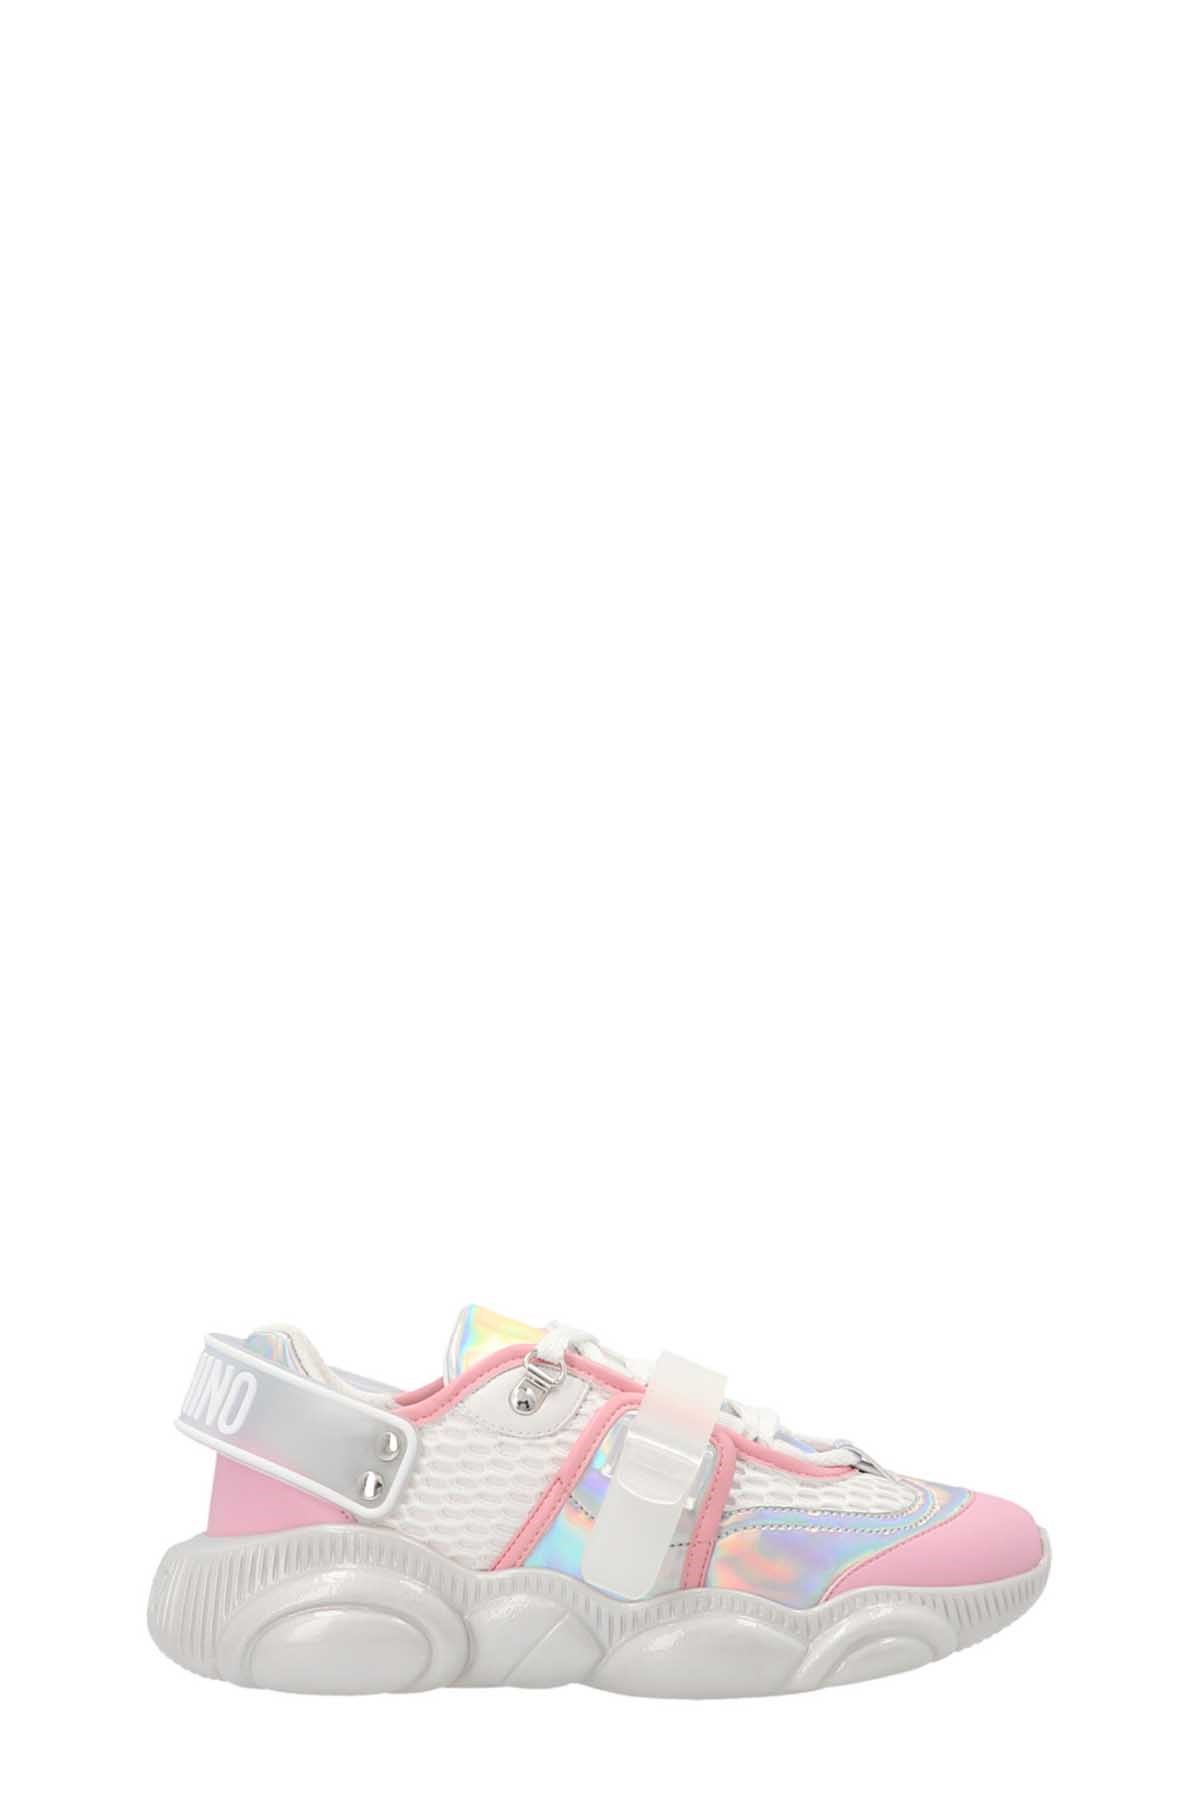 MOSCHINO 'Teddy Tape’ Sneakers